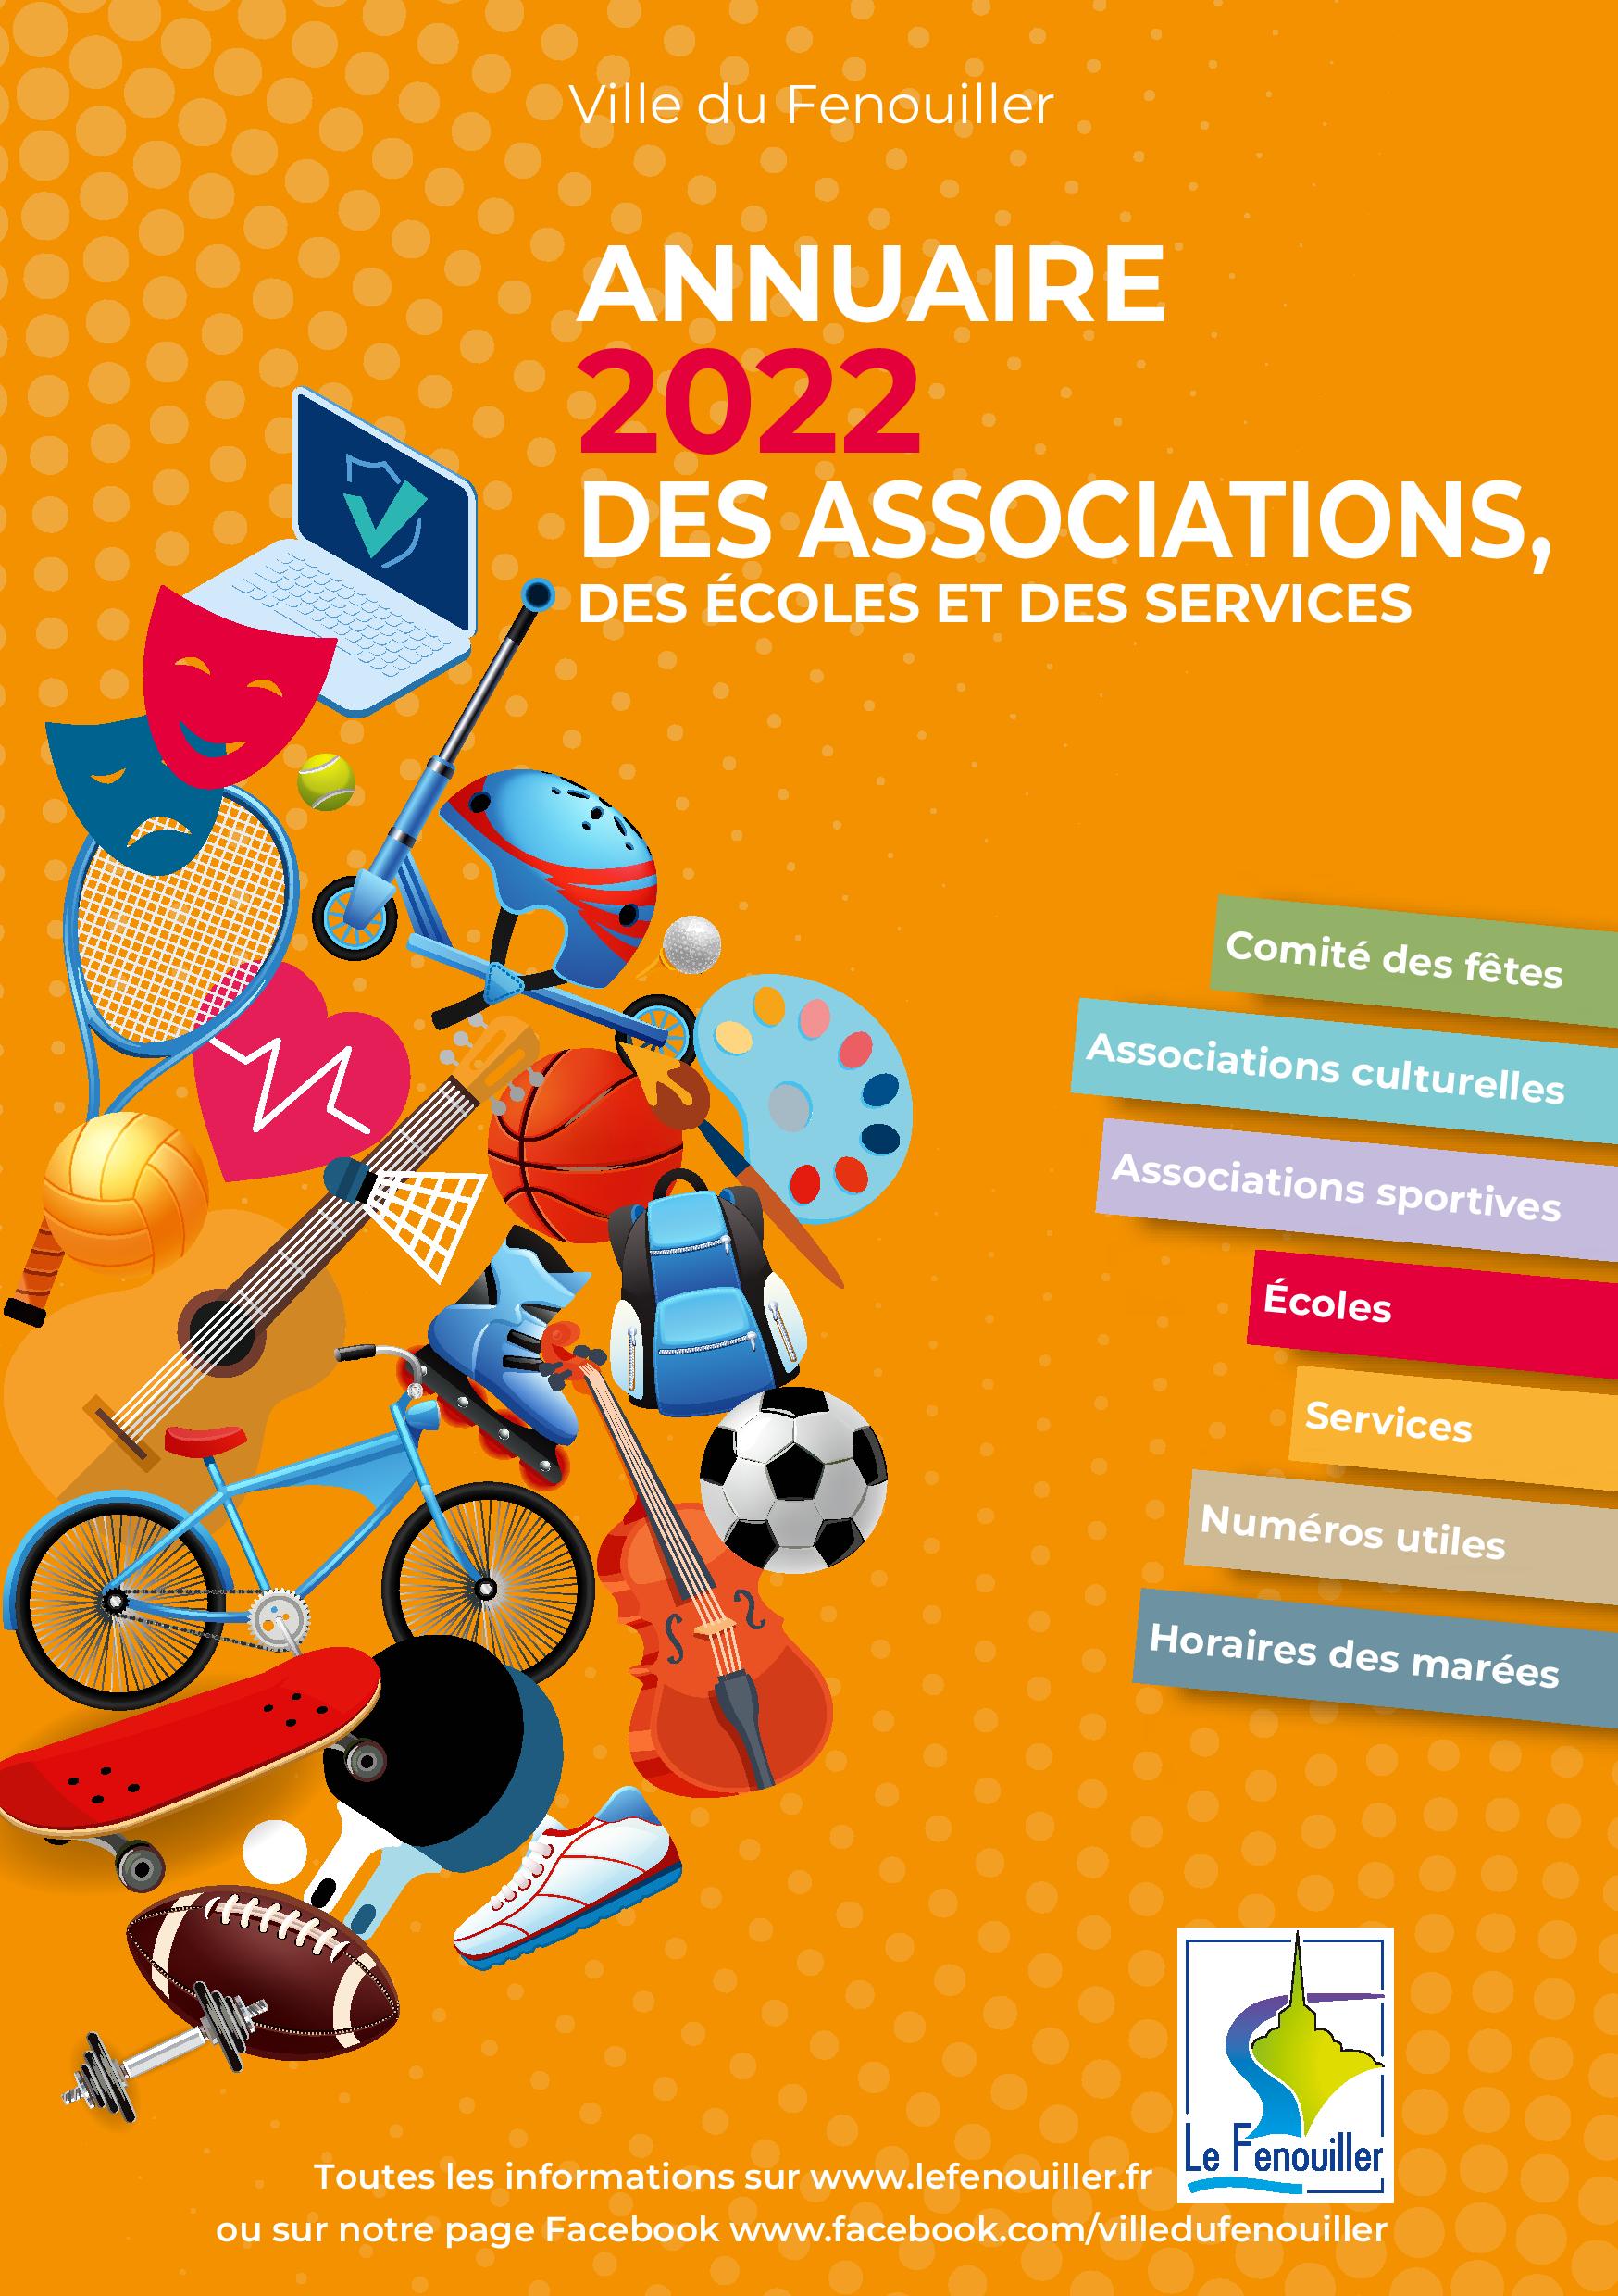 COUV ANNUAIRE ASSO 2022.jpg